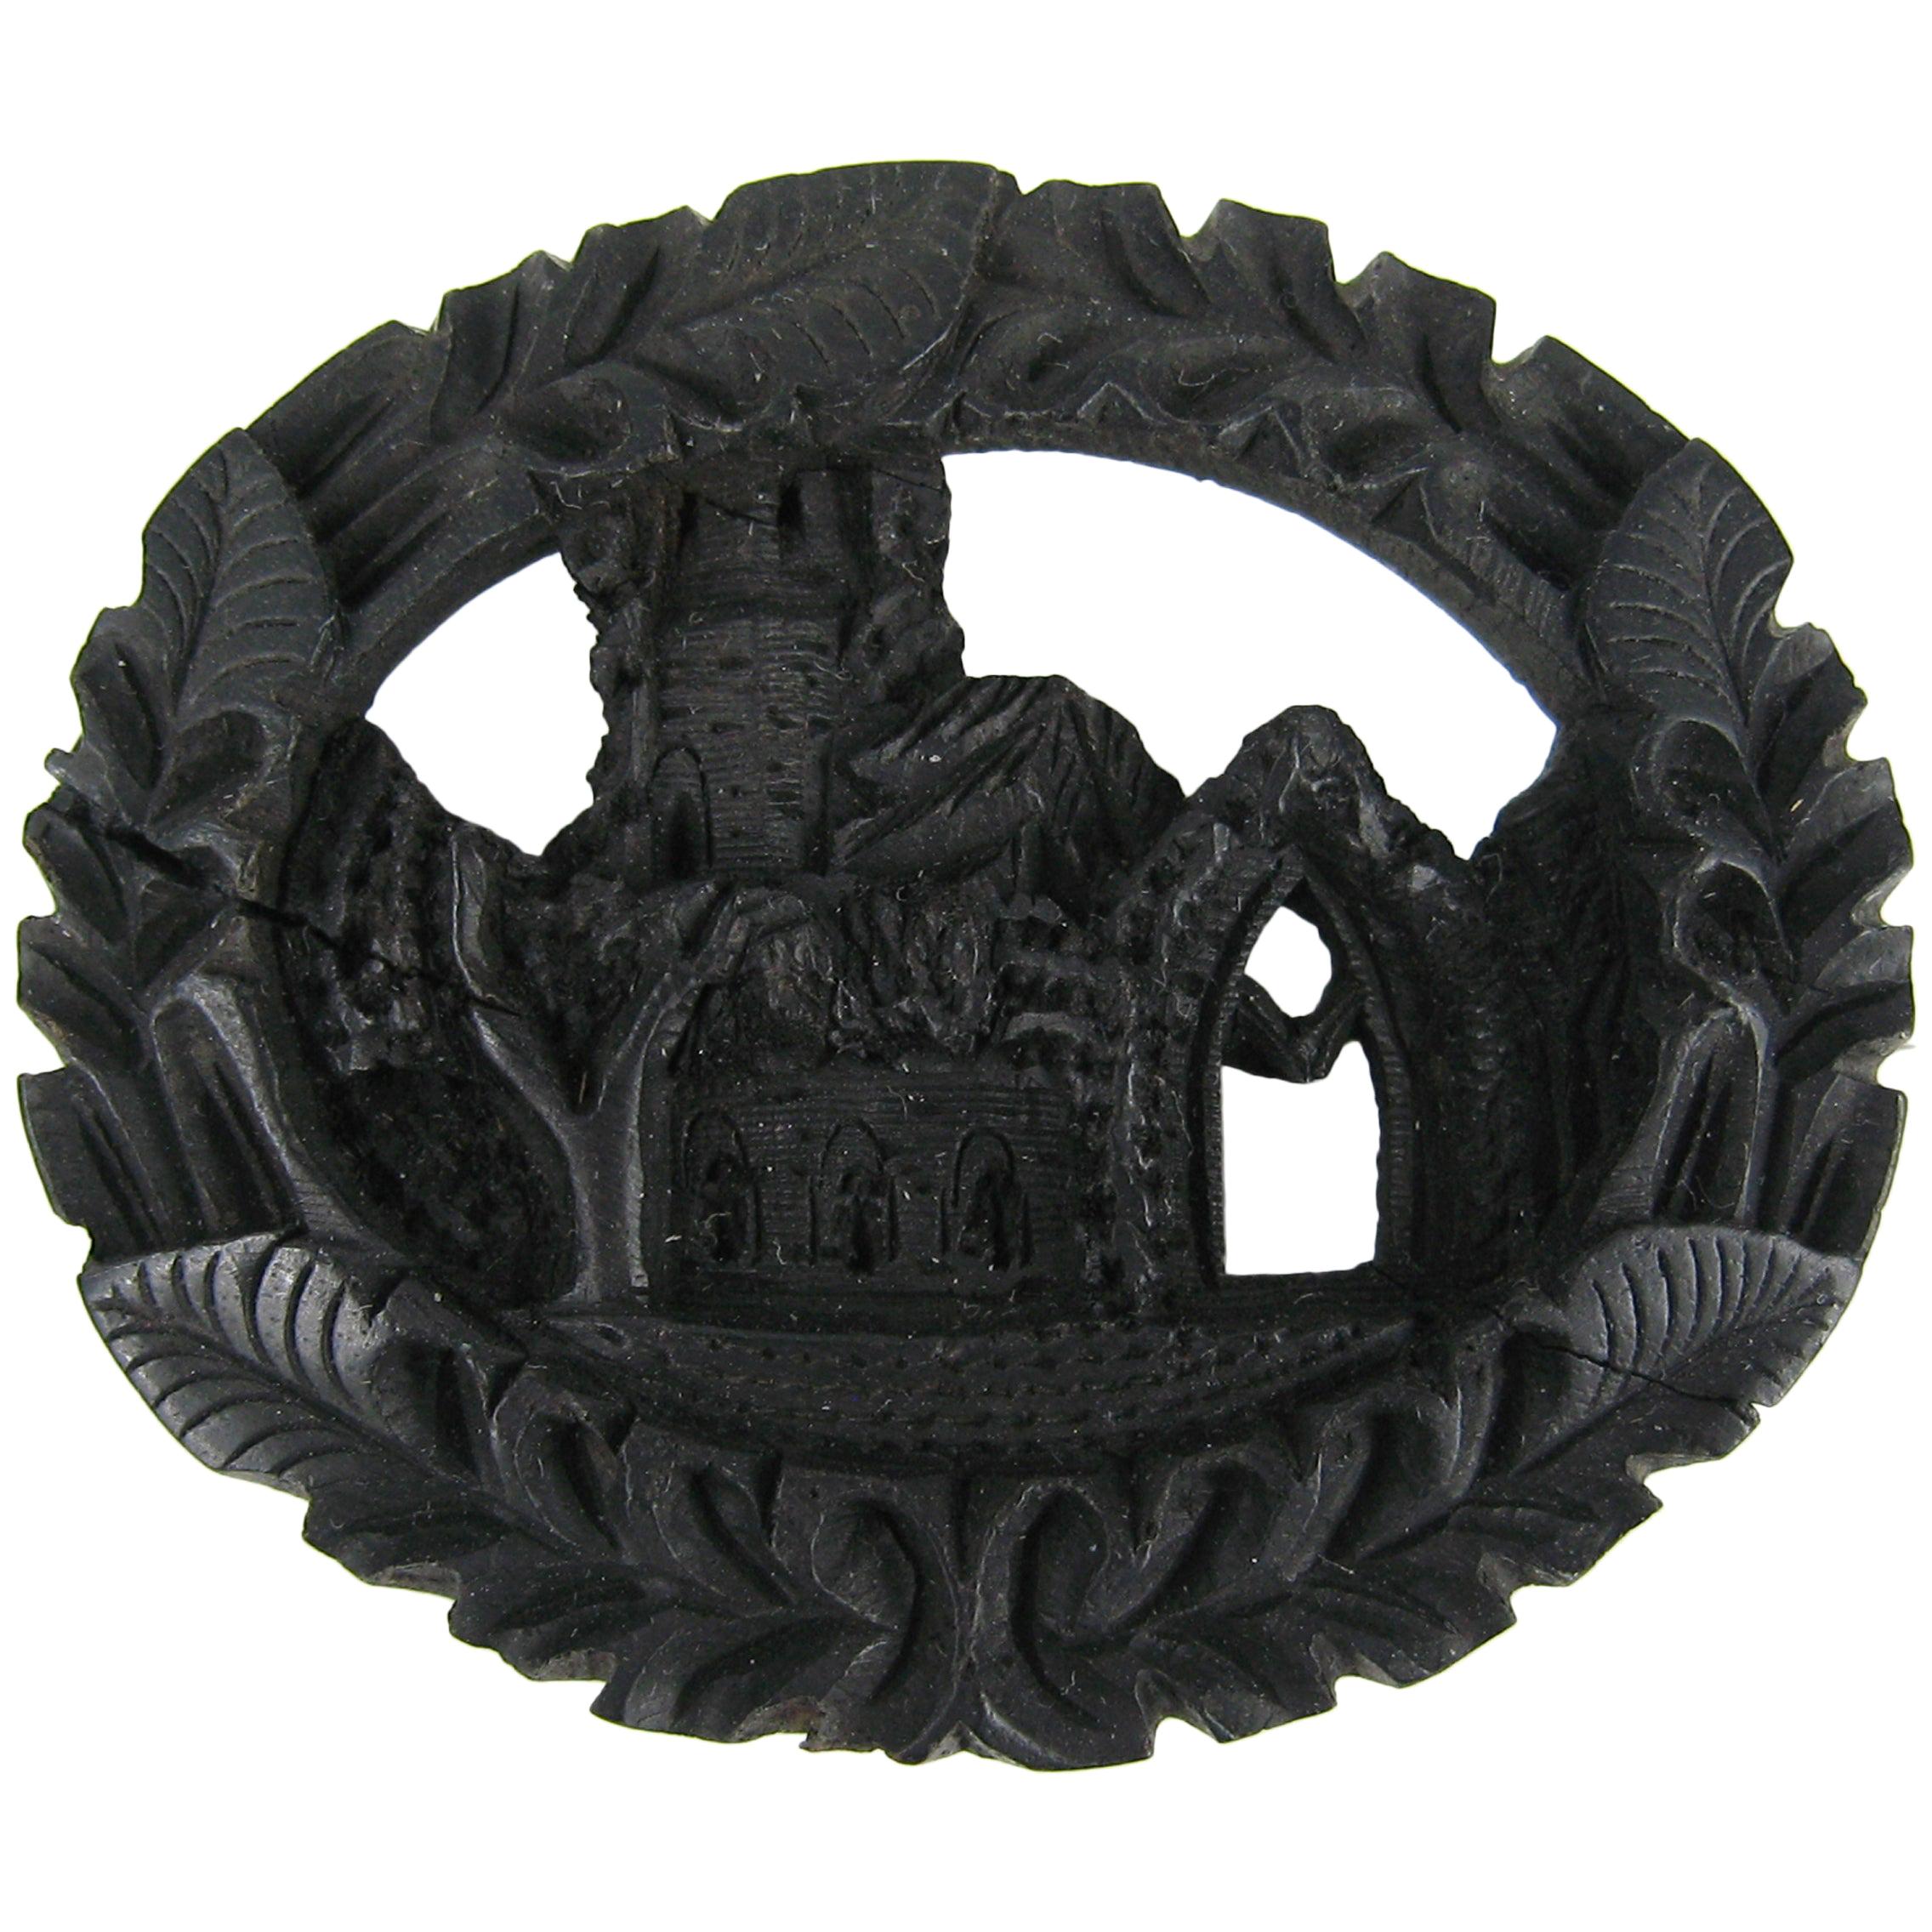 Victorian Whitby Jet Muckross House Mourning Brooch Pin  For Sale